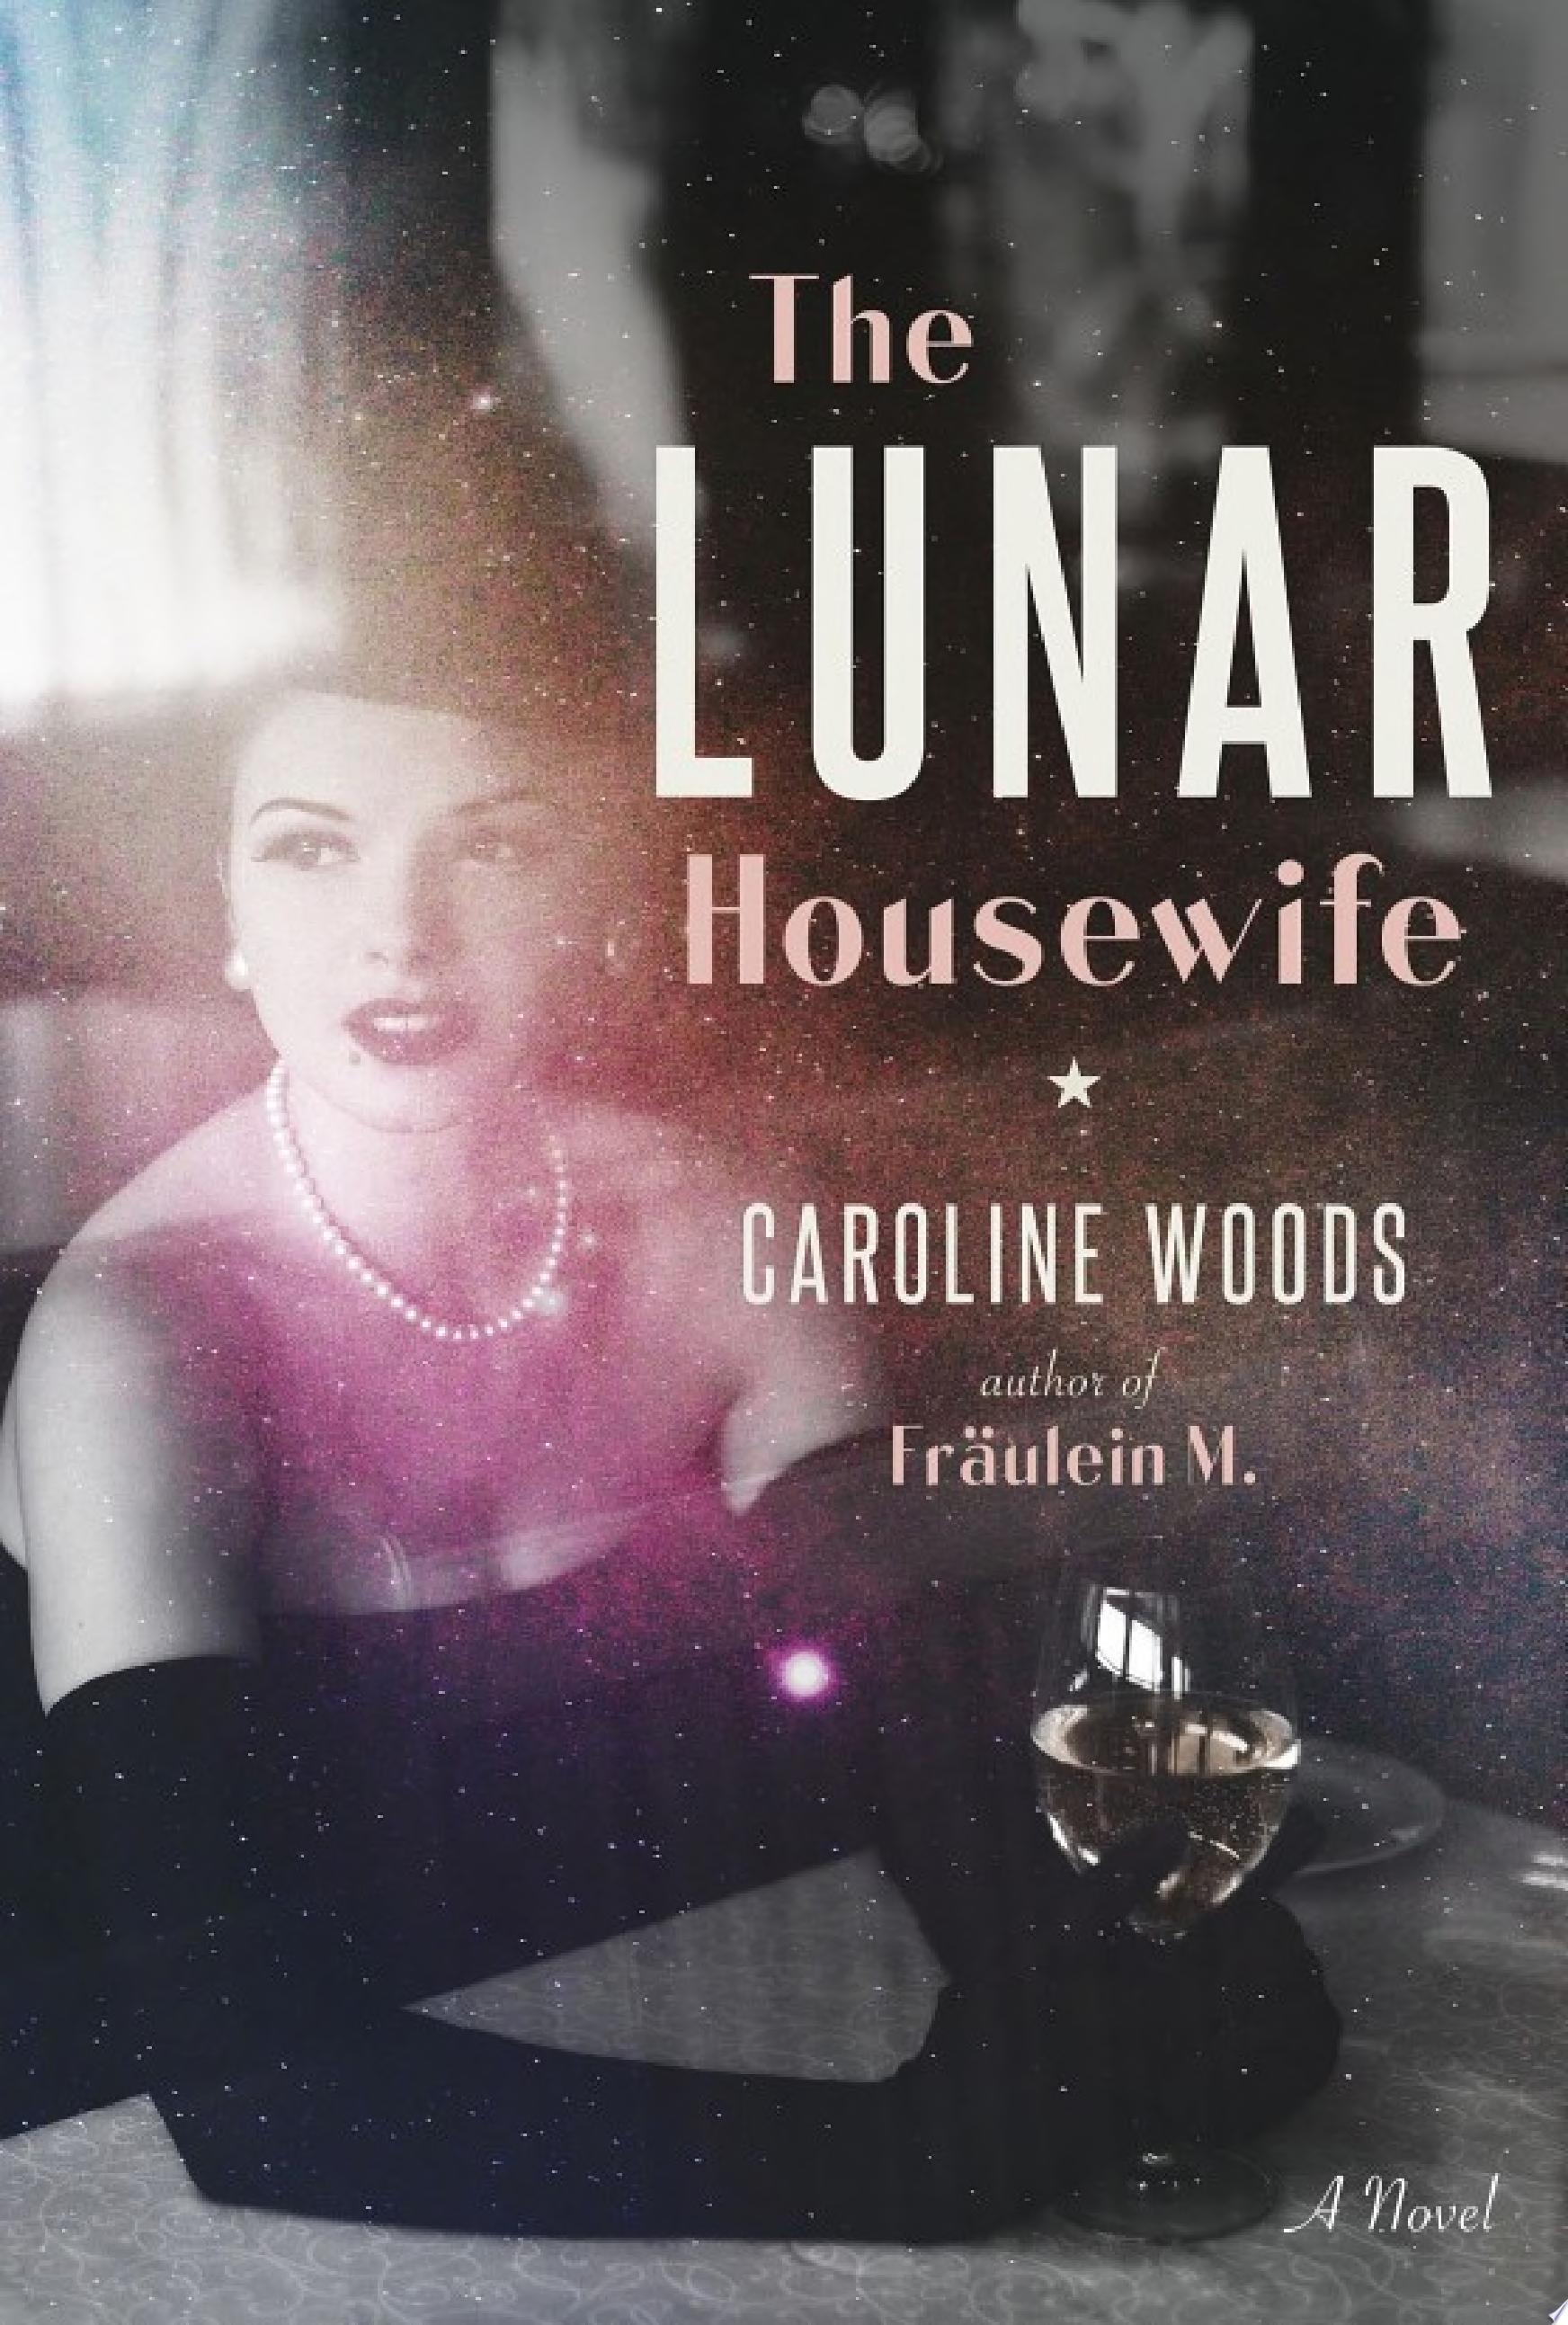 Image for "The Lunar Housewife"